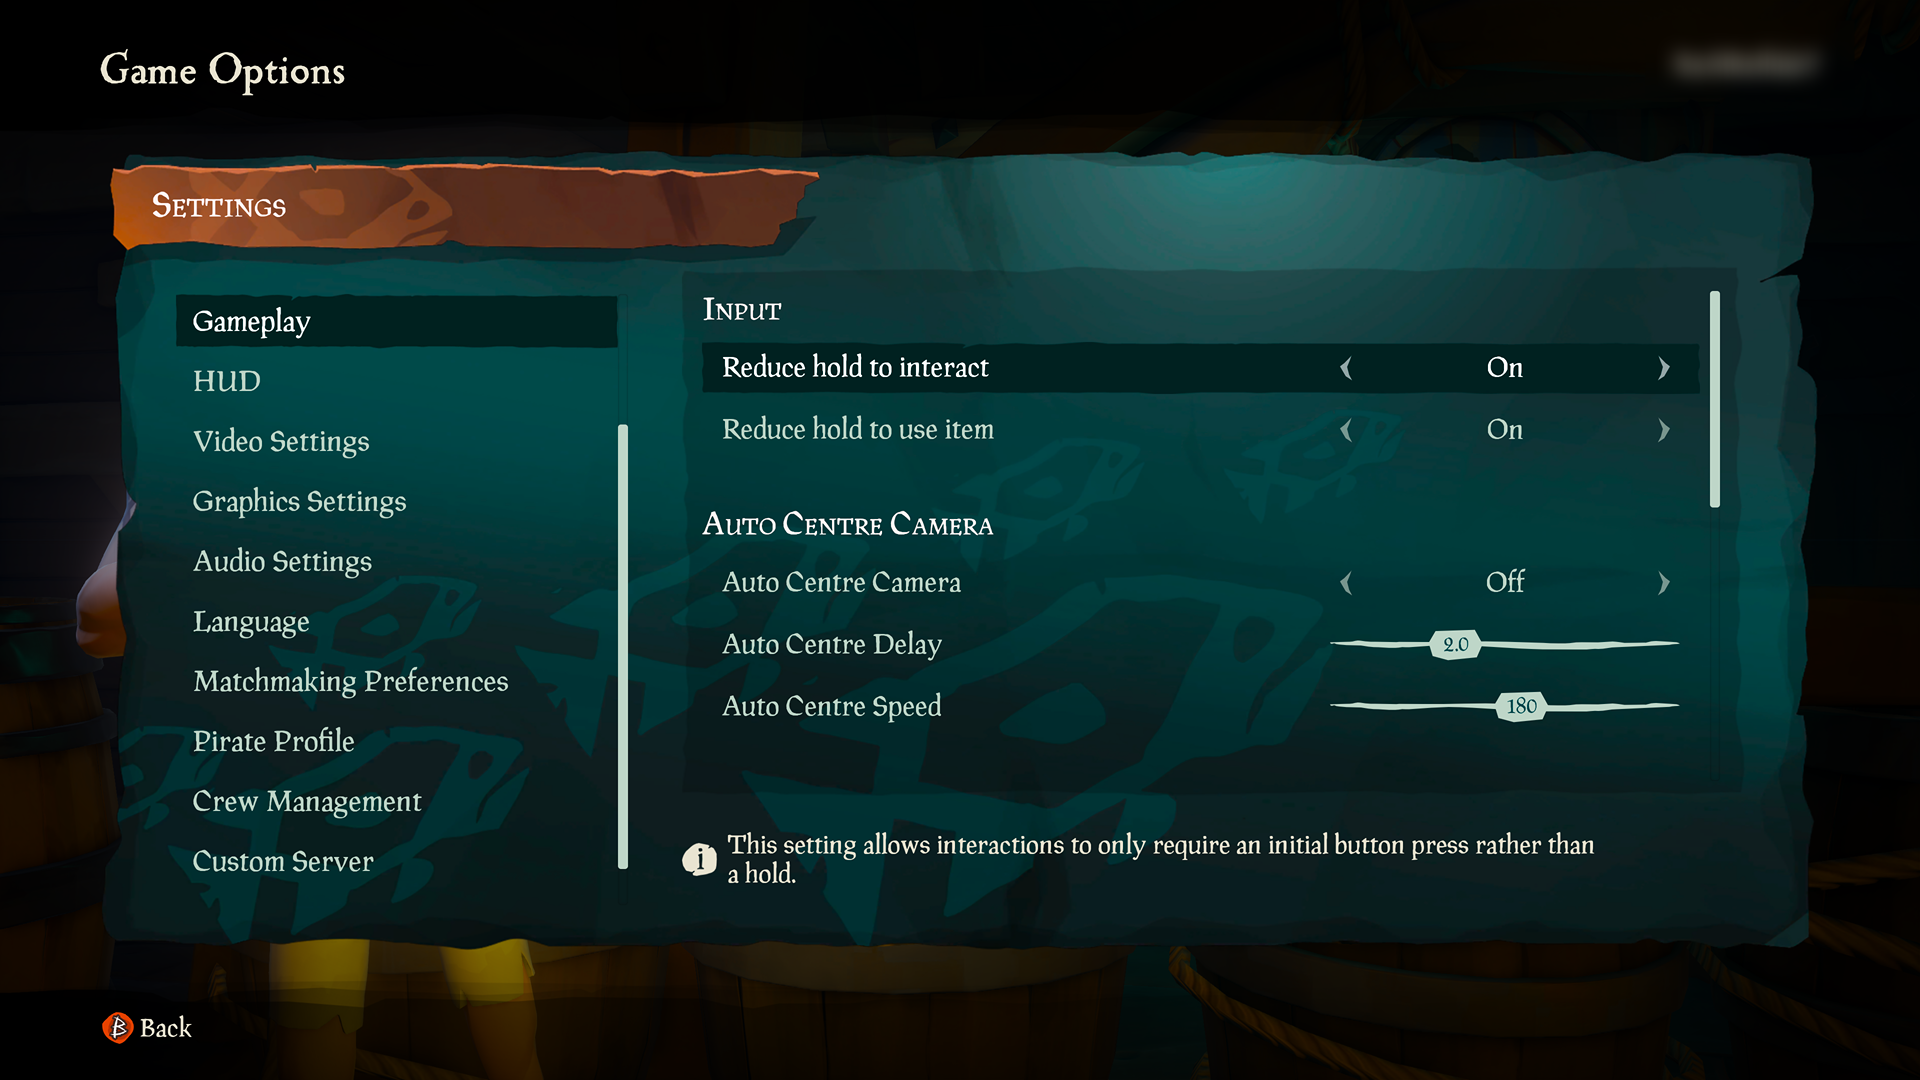 Sea of Thieves screenshot of game play settings menu showing several options including three options under the heading, "Auto Centre Camera". Here, "auto centre camera" is set to off, "auto centre delay is set to 2.0", and "auto centre speed" is set to 180.